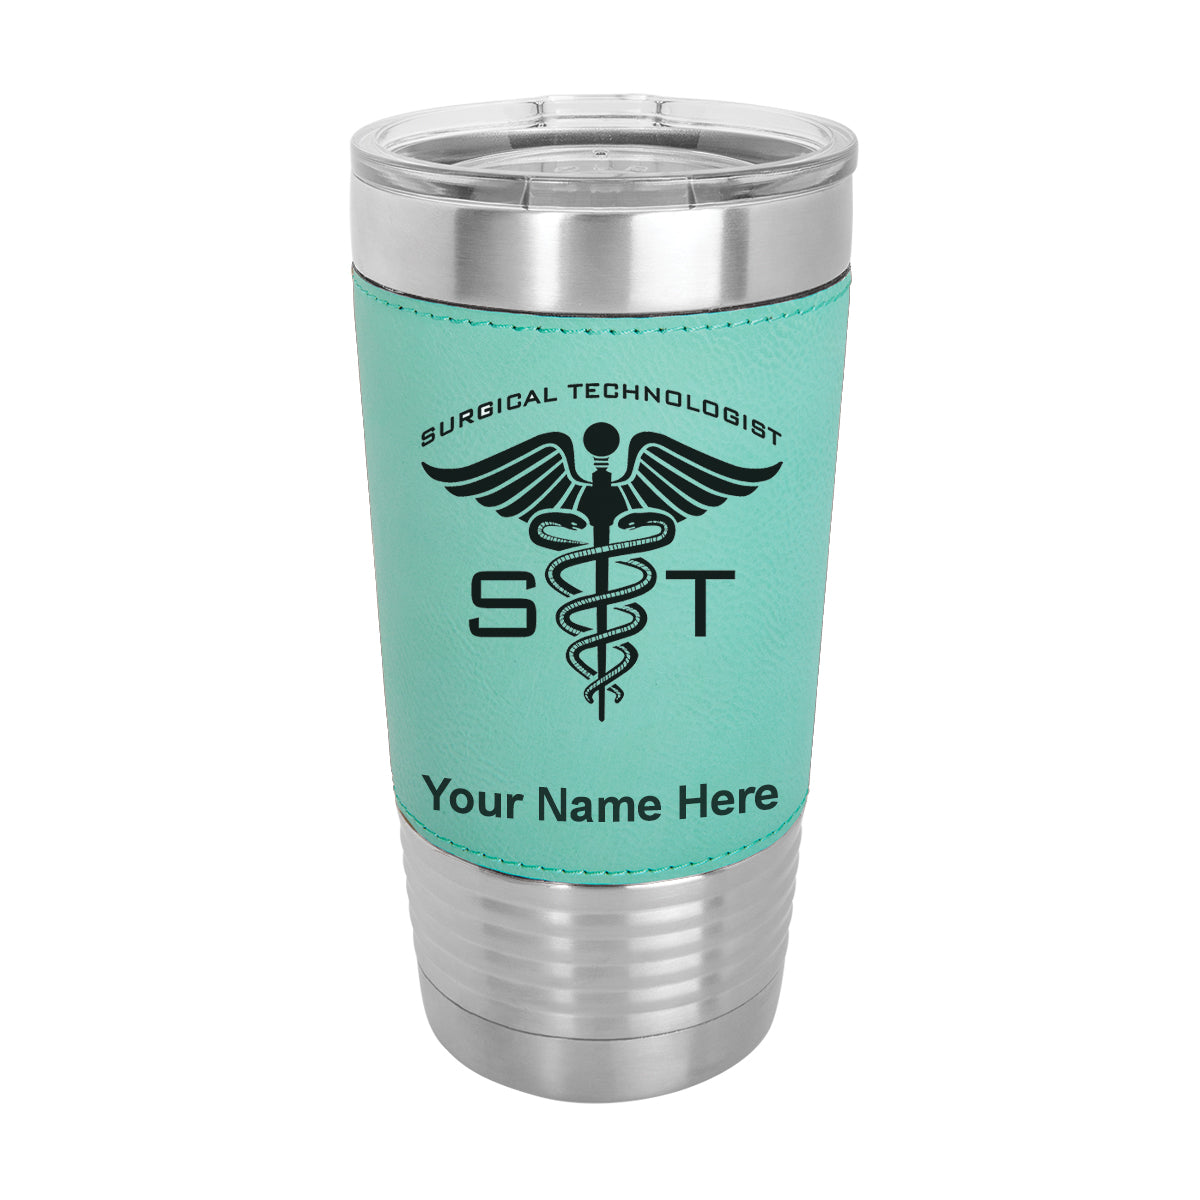 20oz Faux Leather Tumbler Mug, ST Surgical Technologist, Personalized Engraving Included